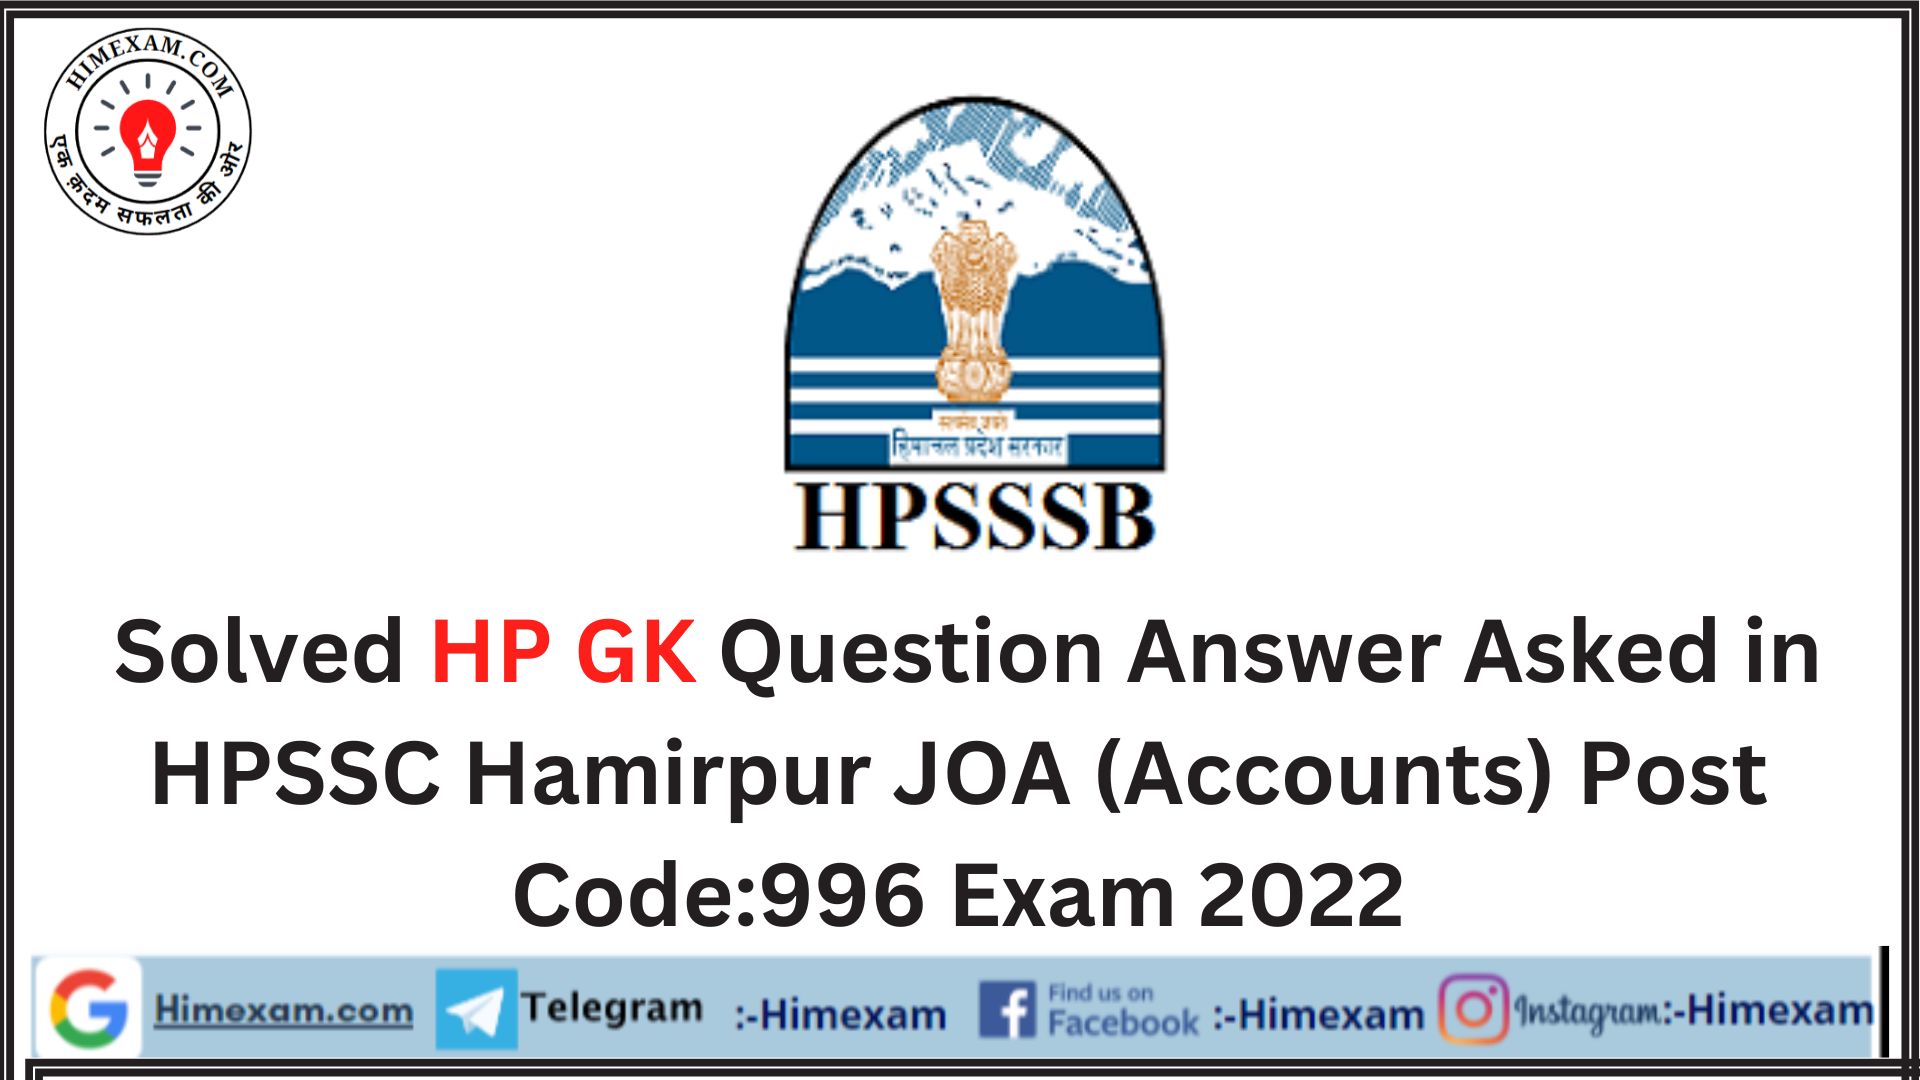 Solved HP GK Question Answer Asked in HPSSC Hamirpur JOA (Accounts) Post Code:996 Exam 2022